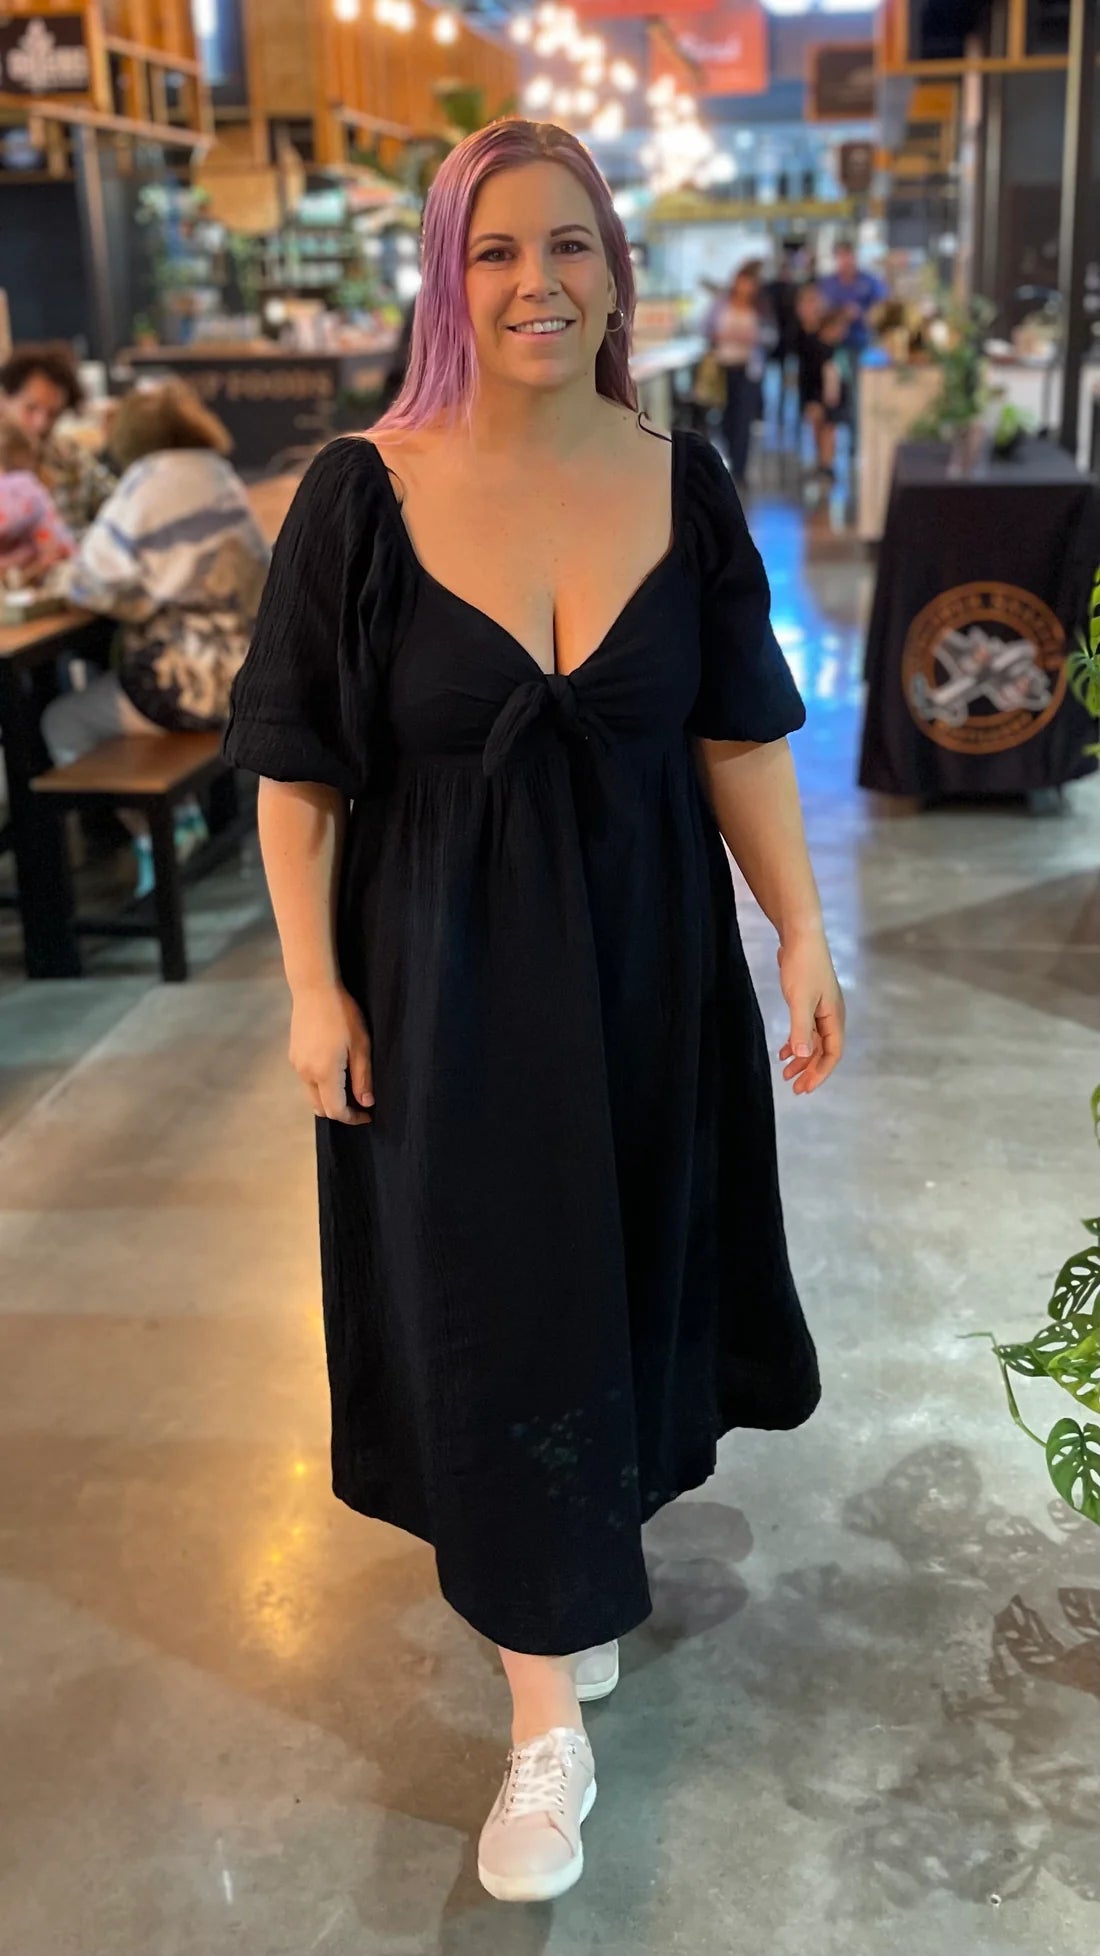 Tilly Reversible Dress: 
Textured and light perfection. The Tilly Dress will be reached for from the wardrobe time and time again with its easy design. This style can be worn both ways, mak - Ciao Bella Dresses 